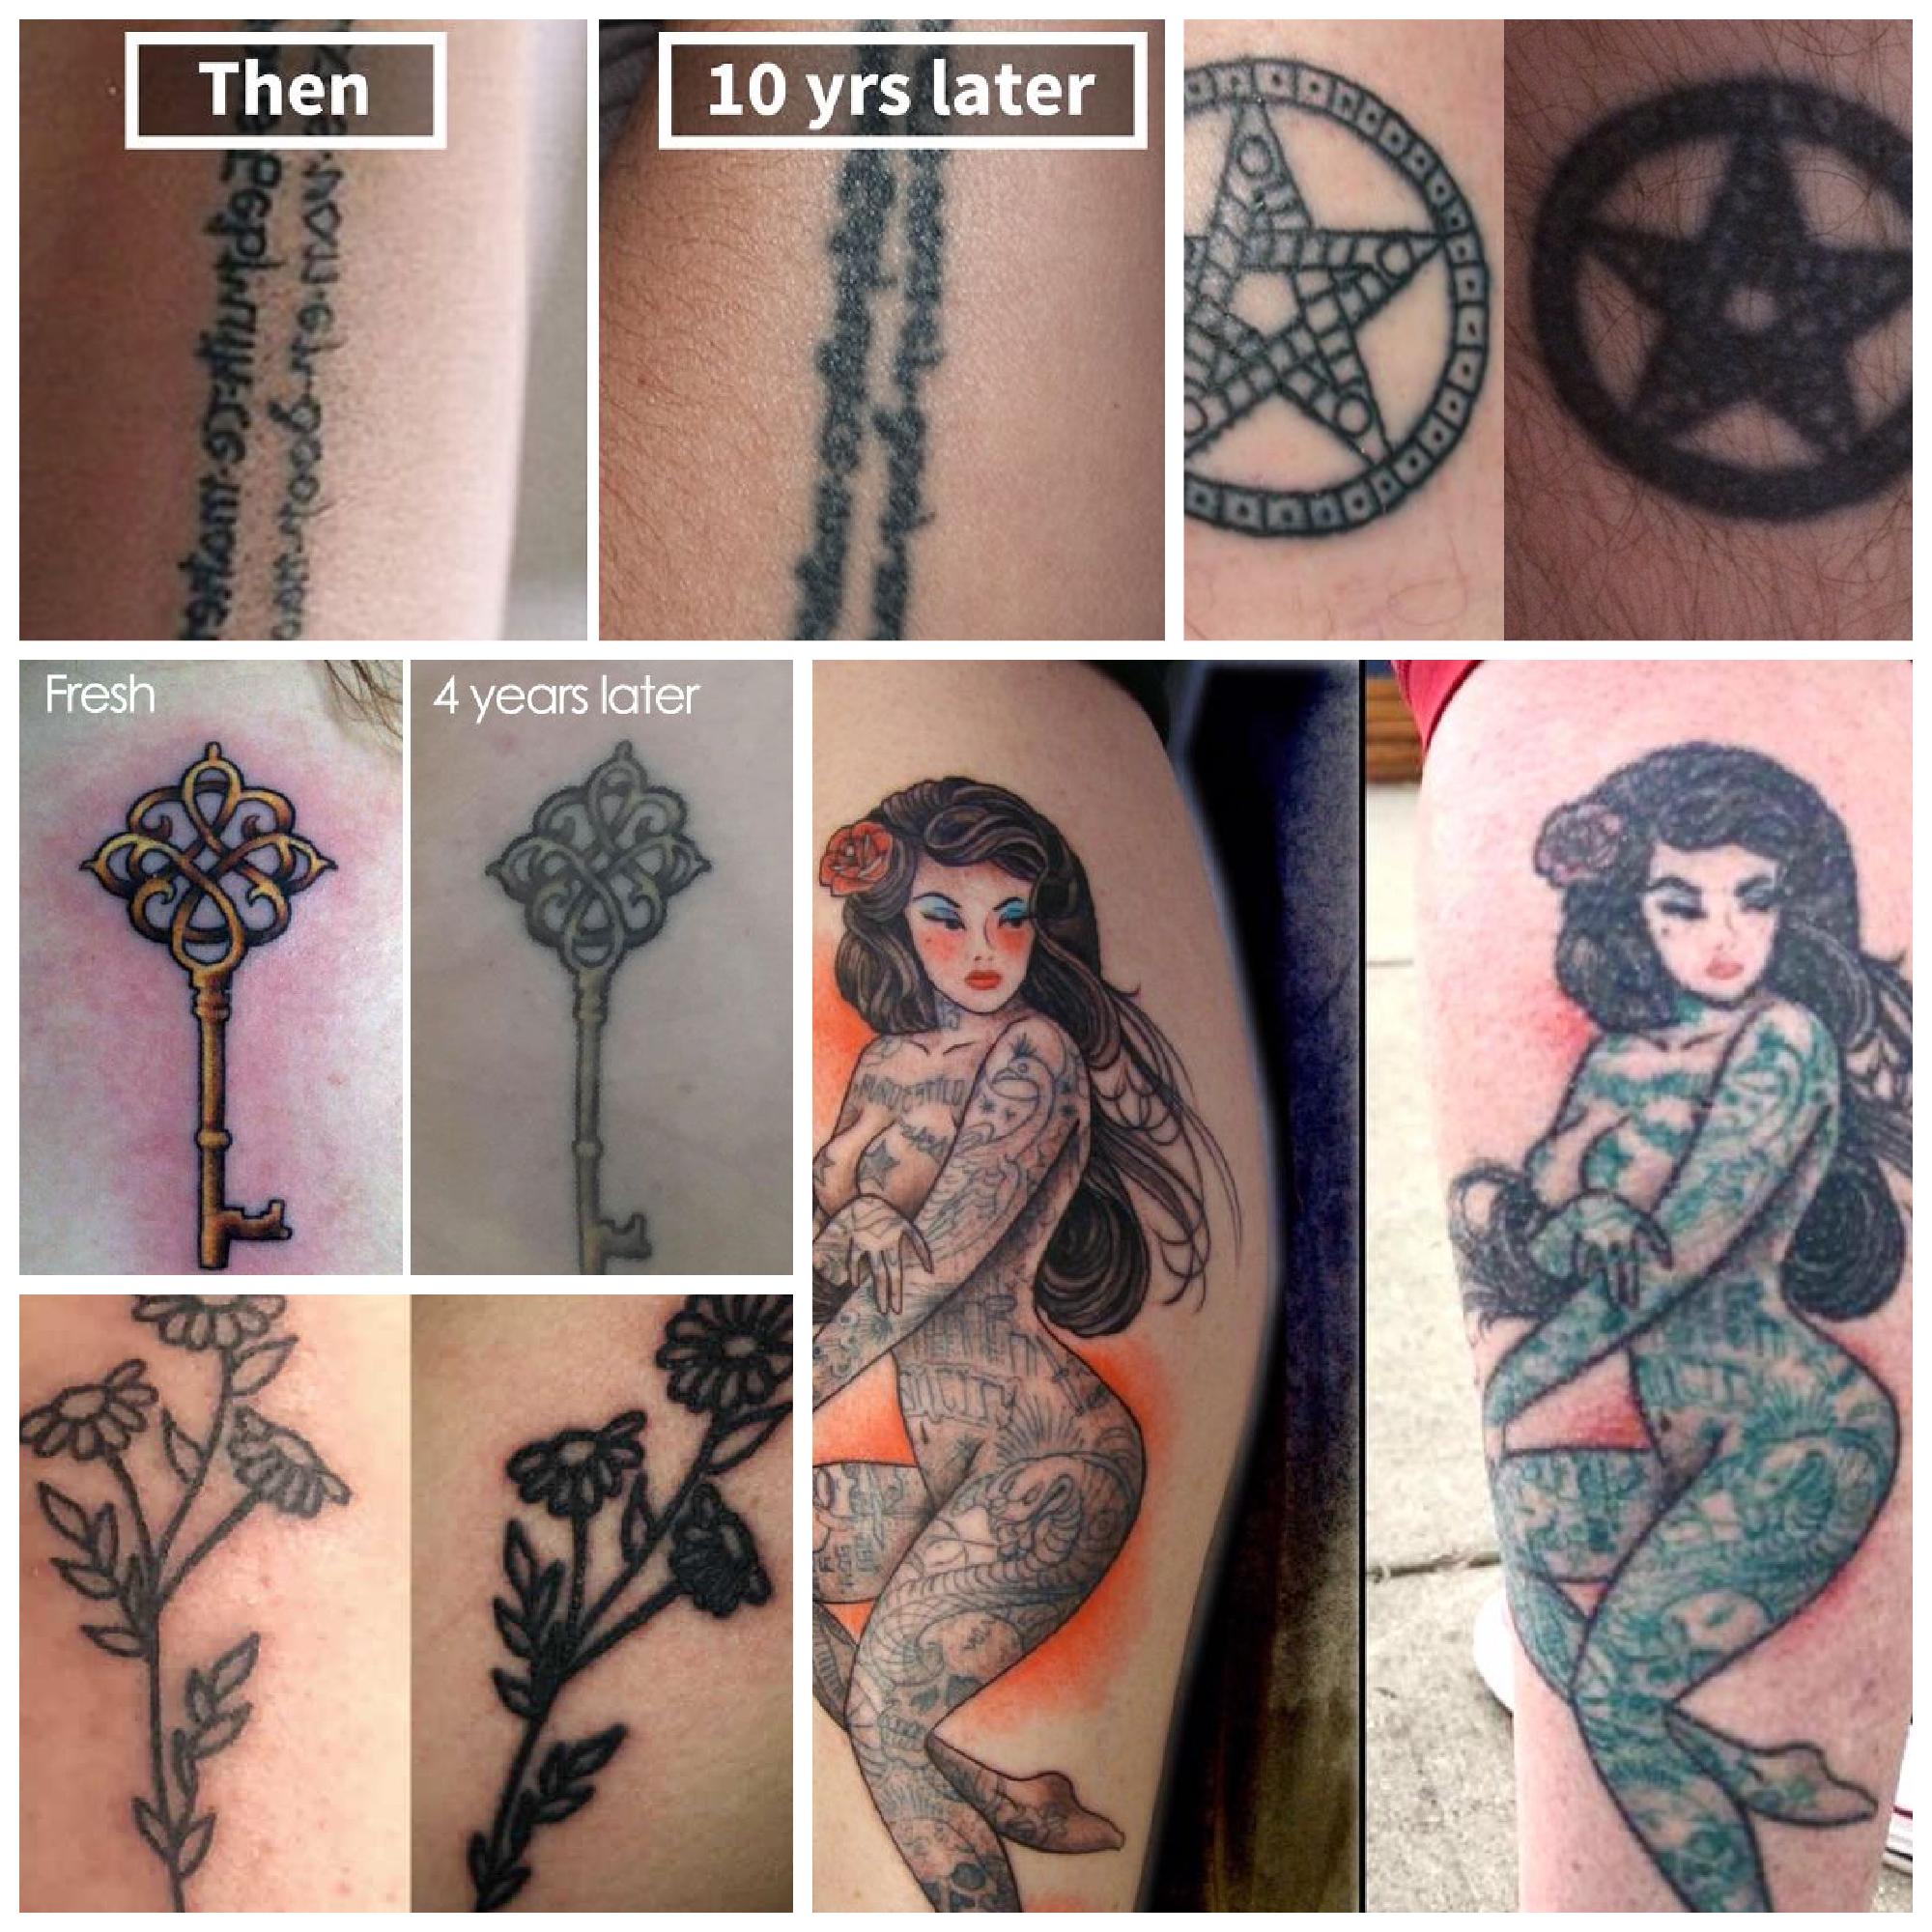 99 SingleLine Tattoos That Are FineLine Perfection  Bored Panda